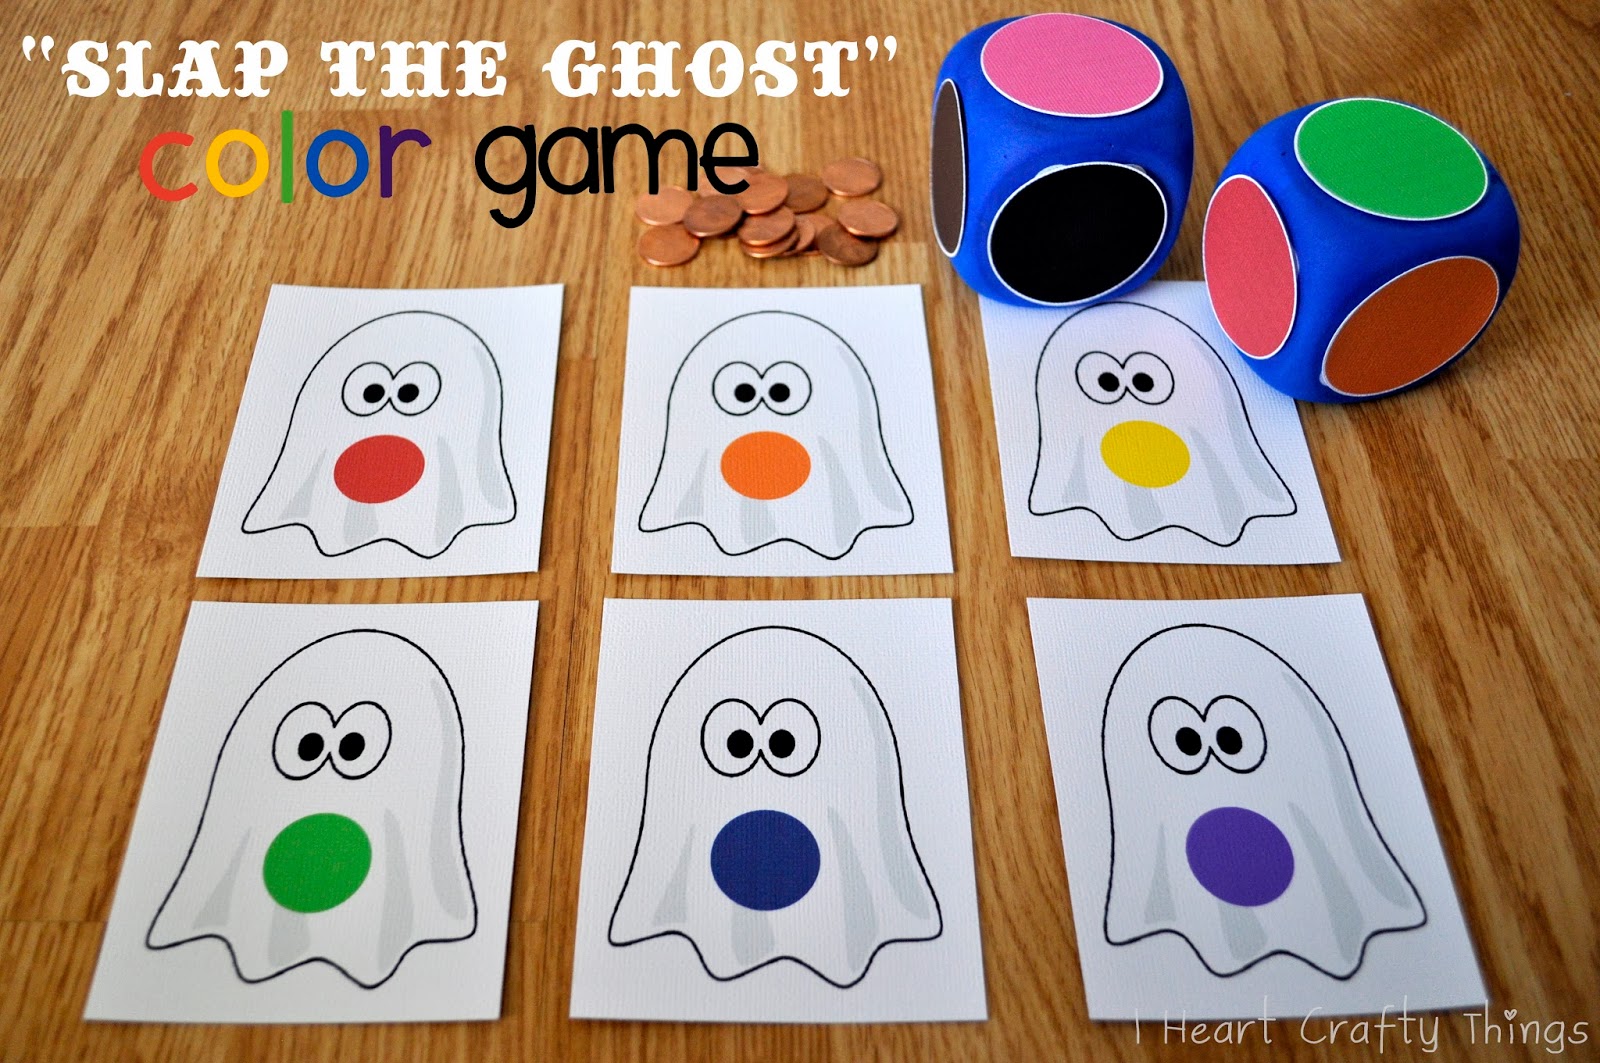  Slap the Ghost Halloween  Color Game I Heart Crafty Things